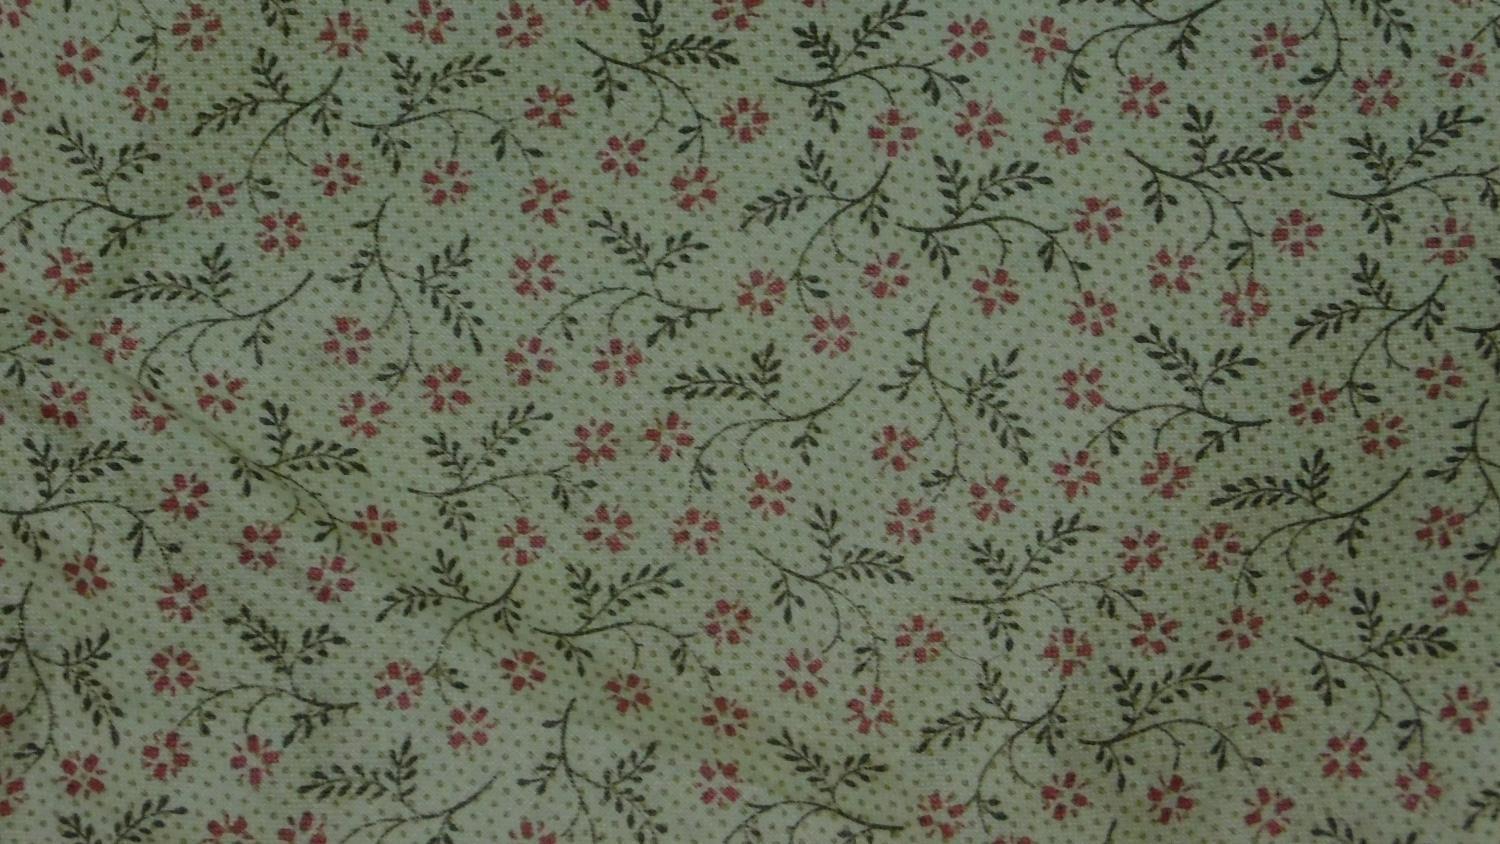 A vintage hand stitched bed cover. 204x211cm - Image 5 of 5